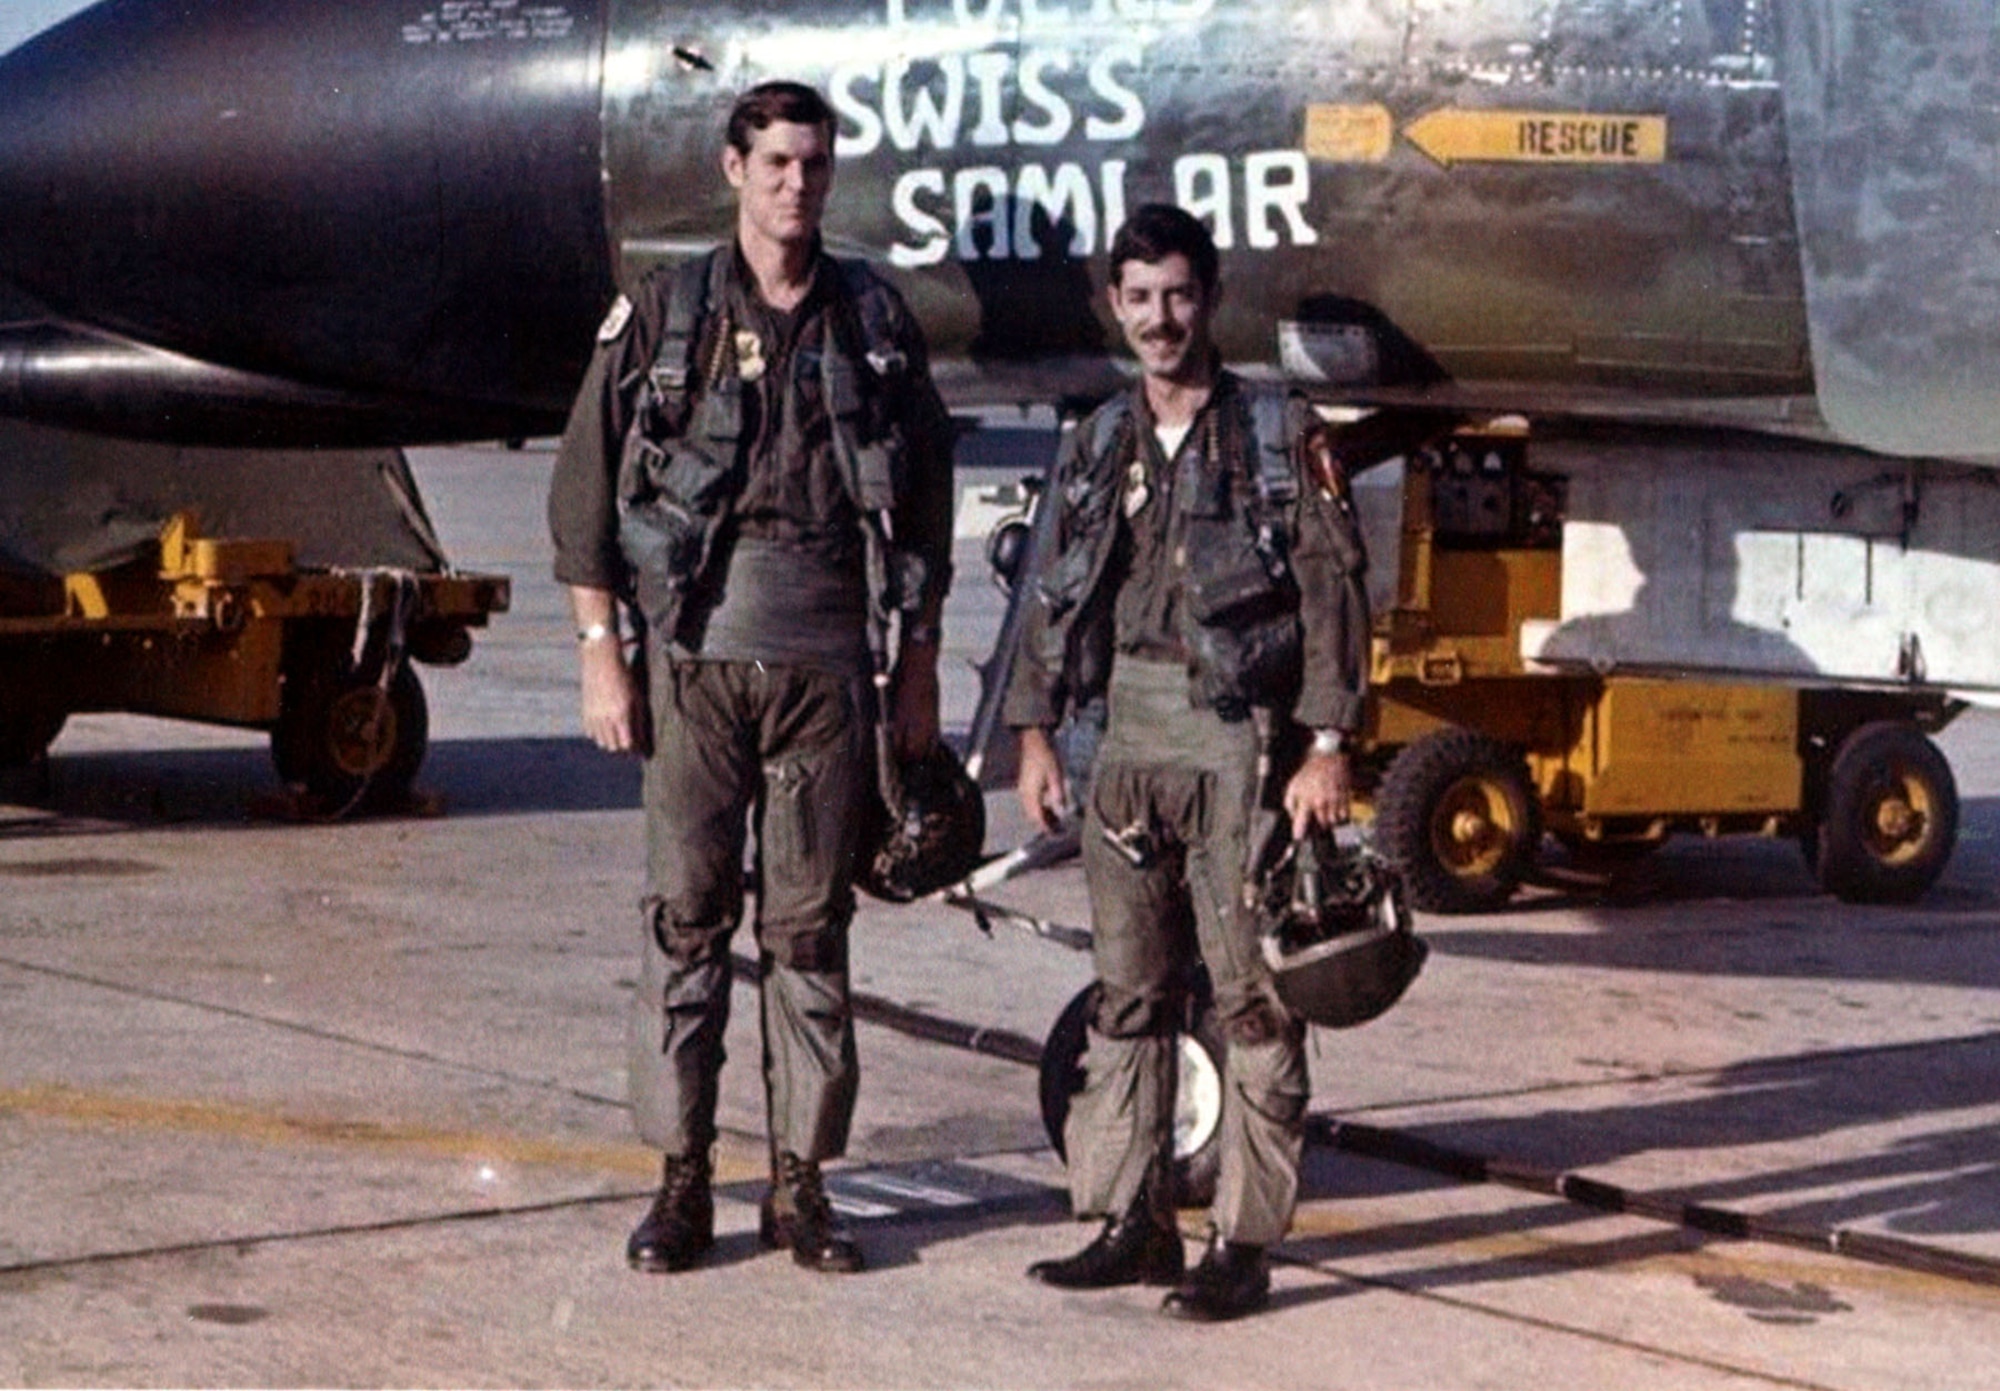 Pictured are Capt. Dick Myers (l) with Capt. Don Triplett (r), EWO. Myers was an flew LINEBACKER missions over North Vietnam. He later rose to the rank of four star general, and from 2001-2005 was the Chairman of the Joint Chiefs of Staff. (U.S. Air Force photo)